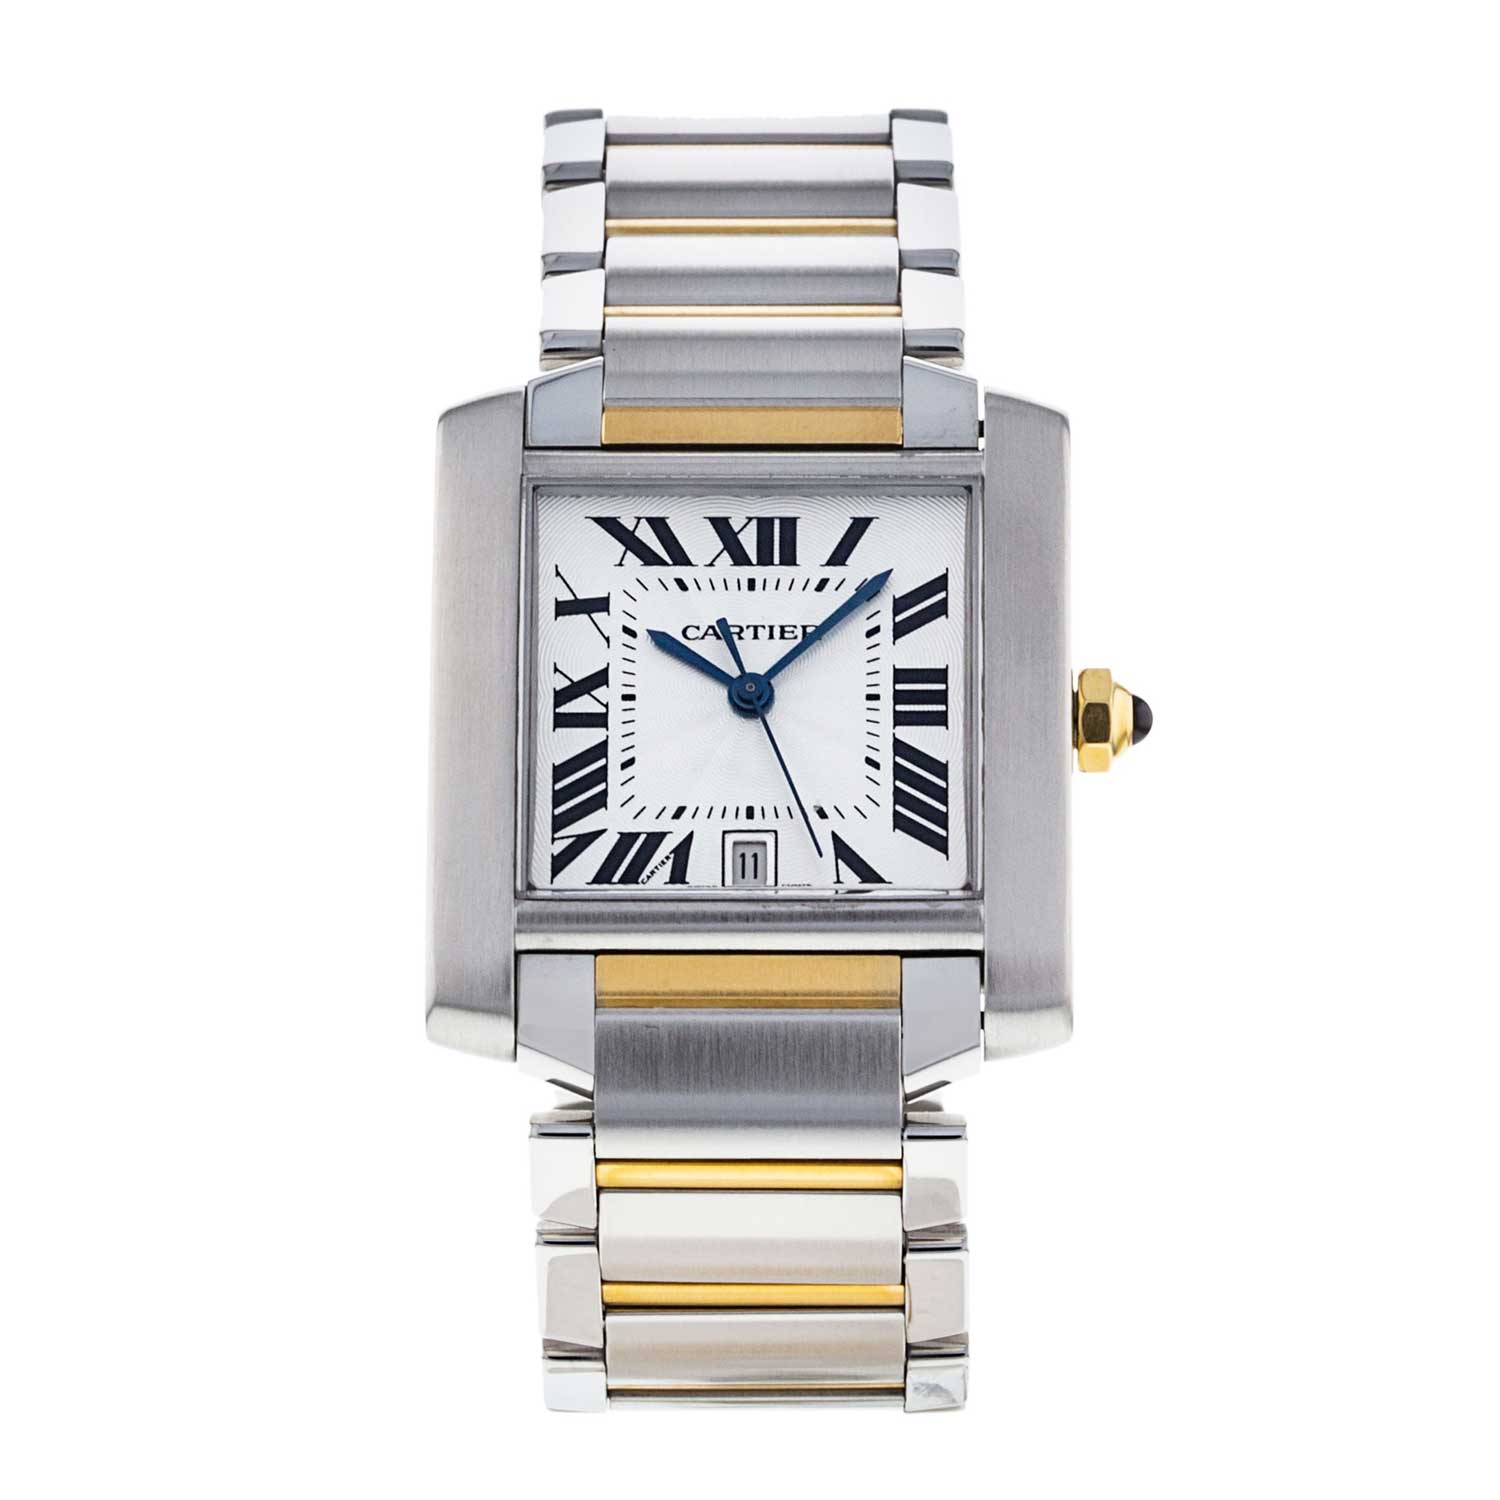 The present example of the Cartier Tank Francaise at our shop is a steel and yellow gold model from 2005.